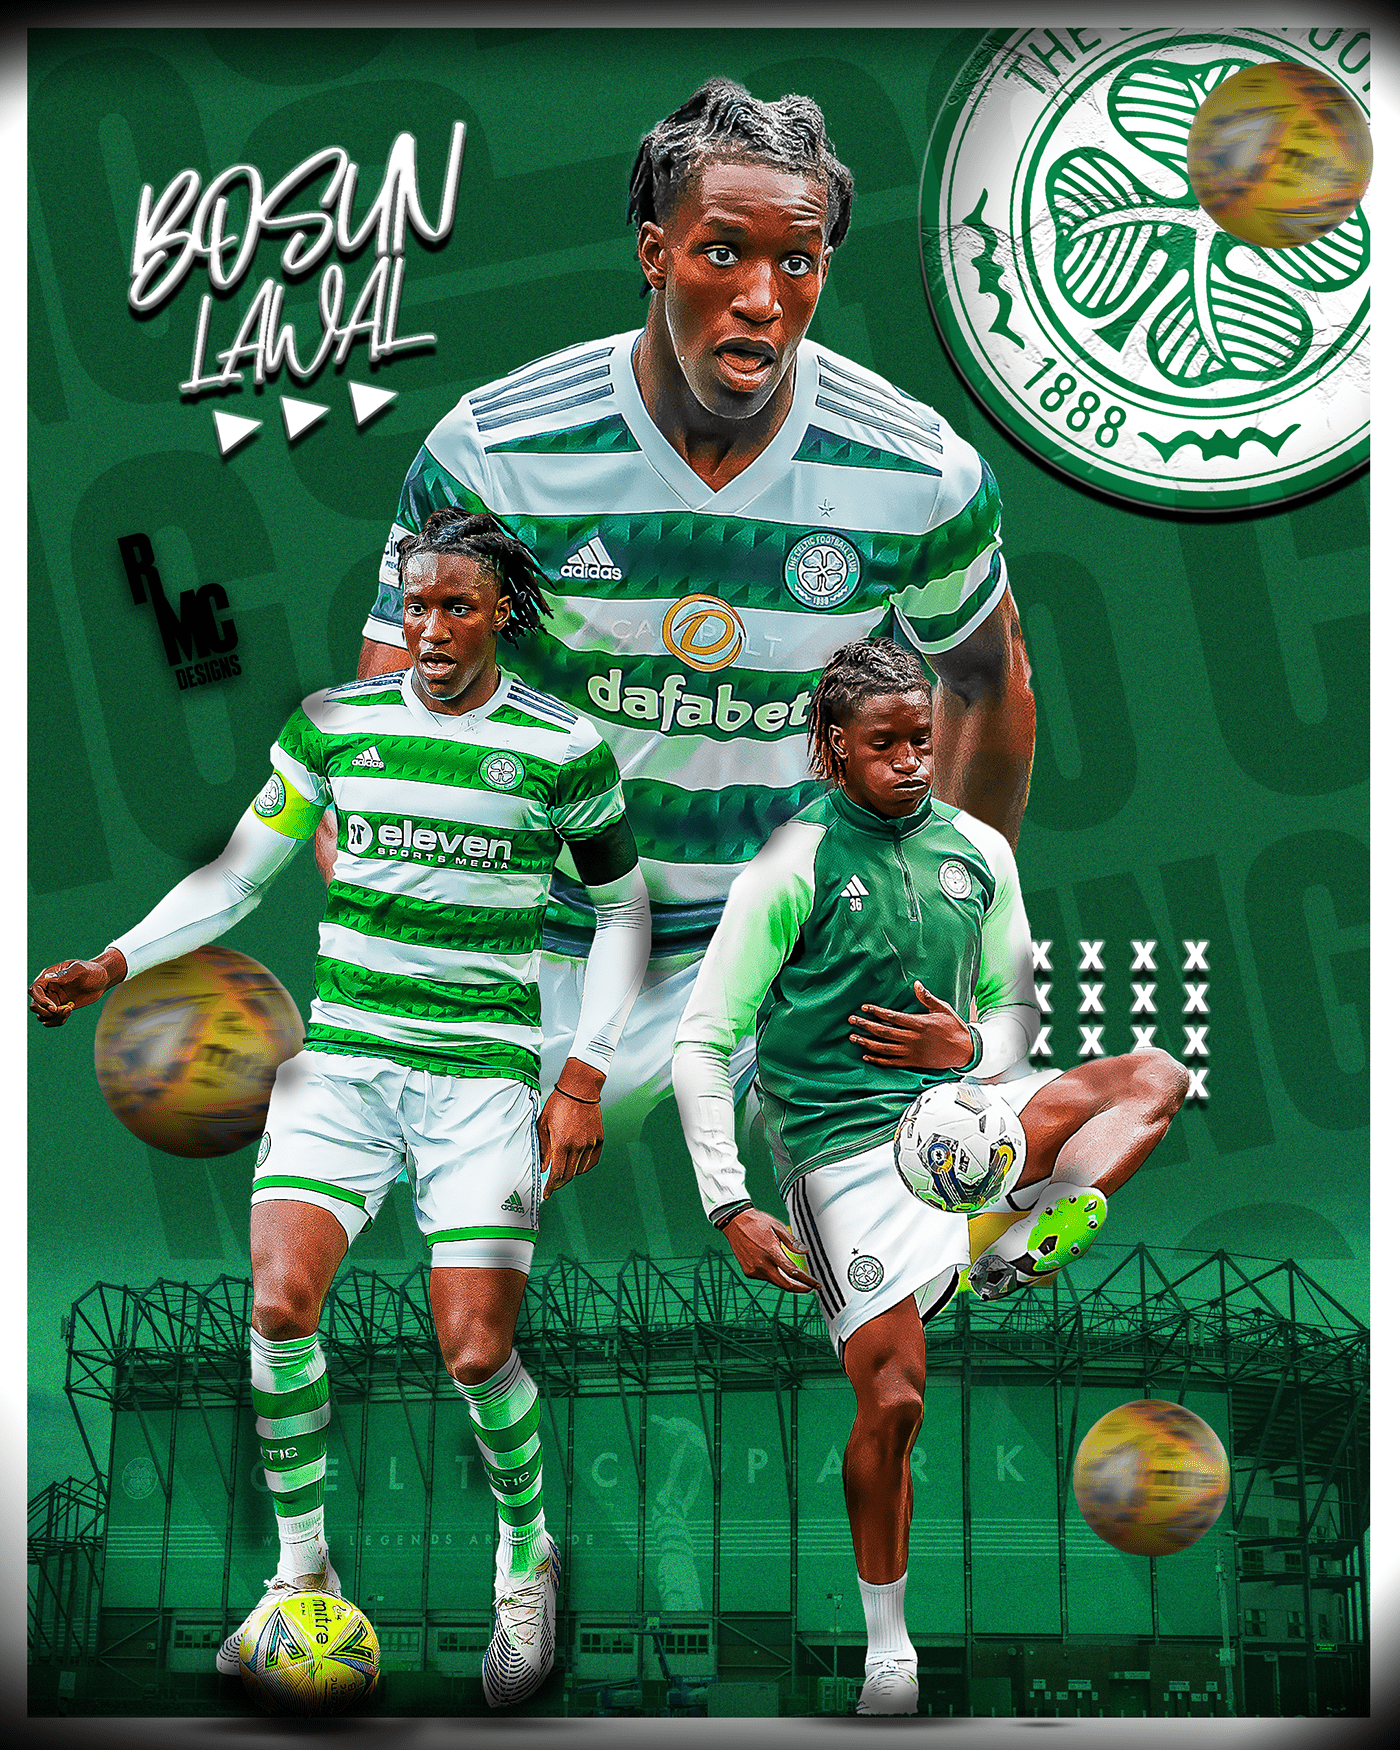 graphicdesign photoshop Celtic football scotland Young growing new TAlent